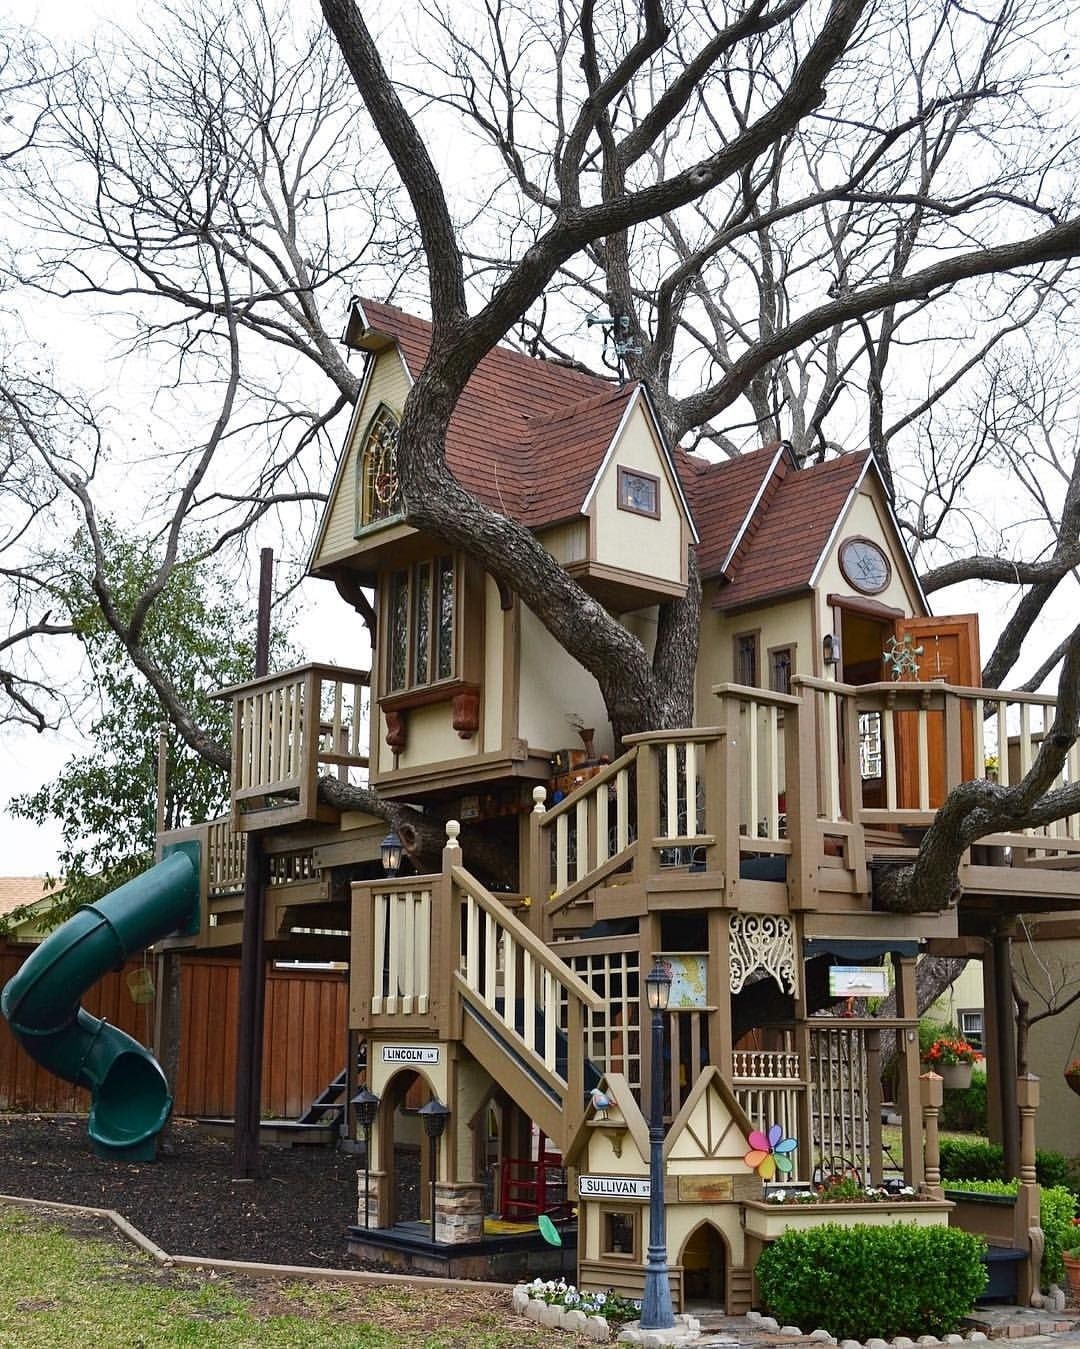 The ultimate tree house for kids equipped with a climbing